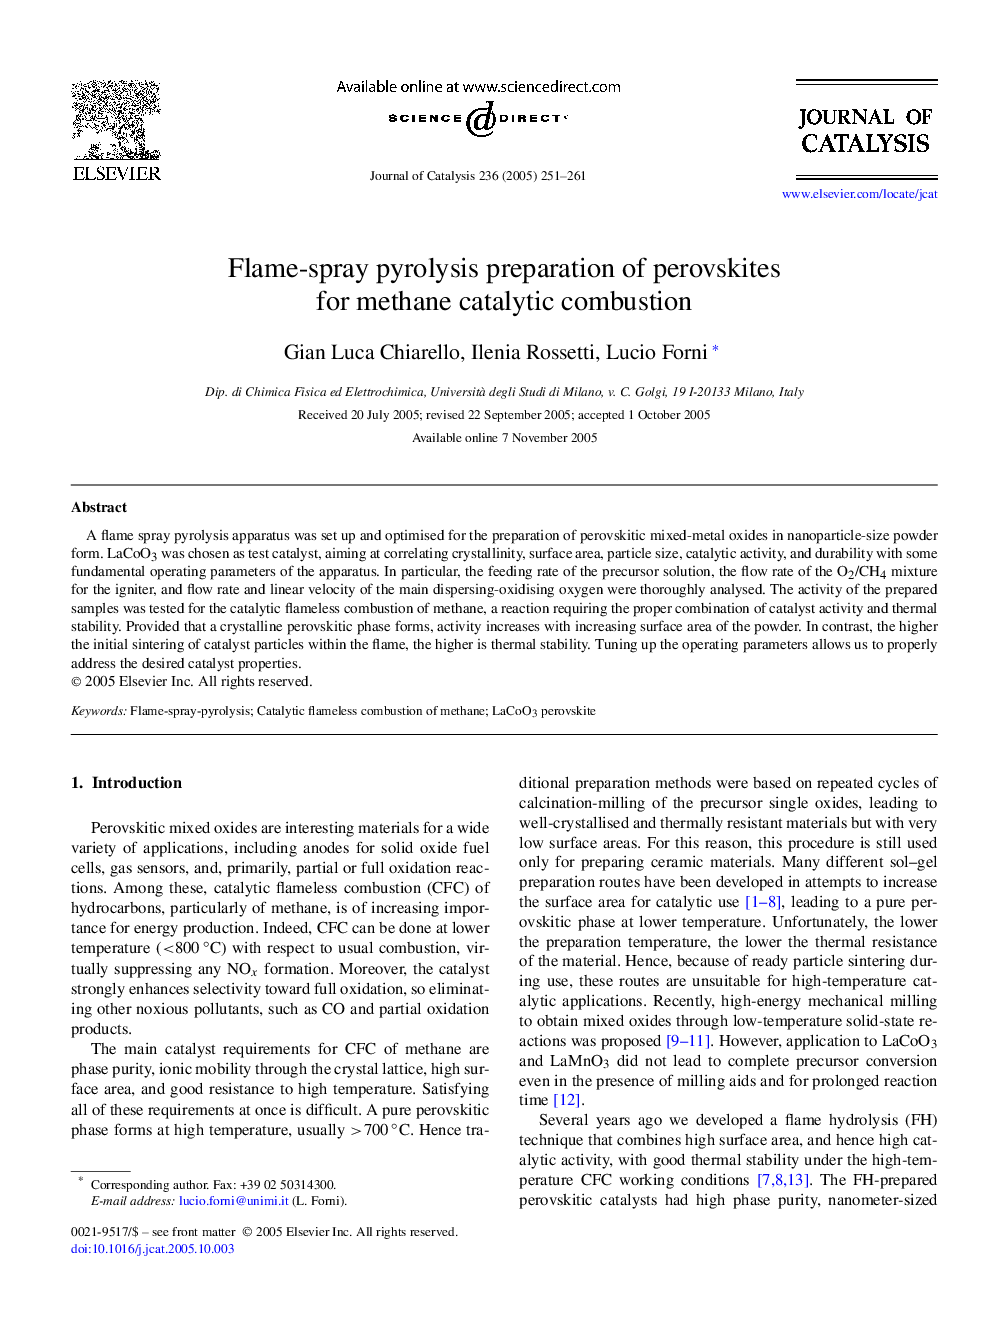 Flame-spray pyrolysis preparation of perovskites for methane catalytic combustion